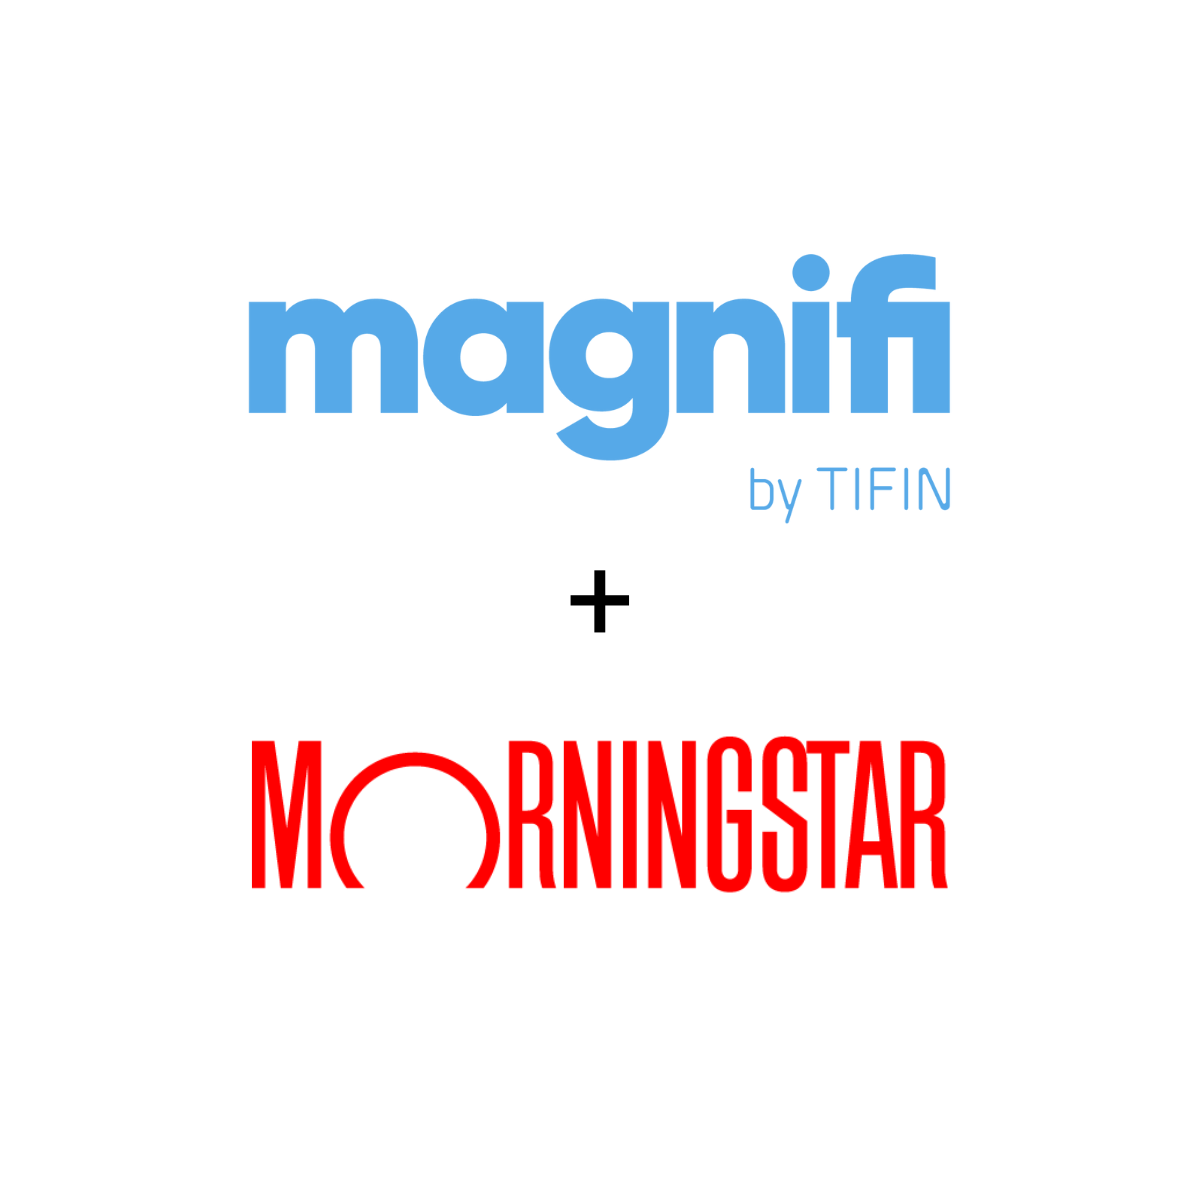 Magnifi by TIFIN brings direct indexing to individual investors and announces managed portfolios based on indexes designed by Morningstar